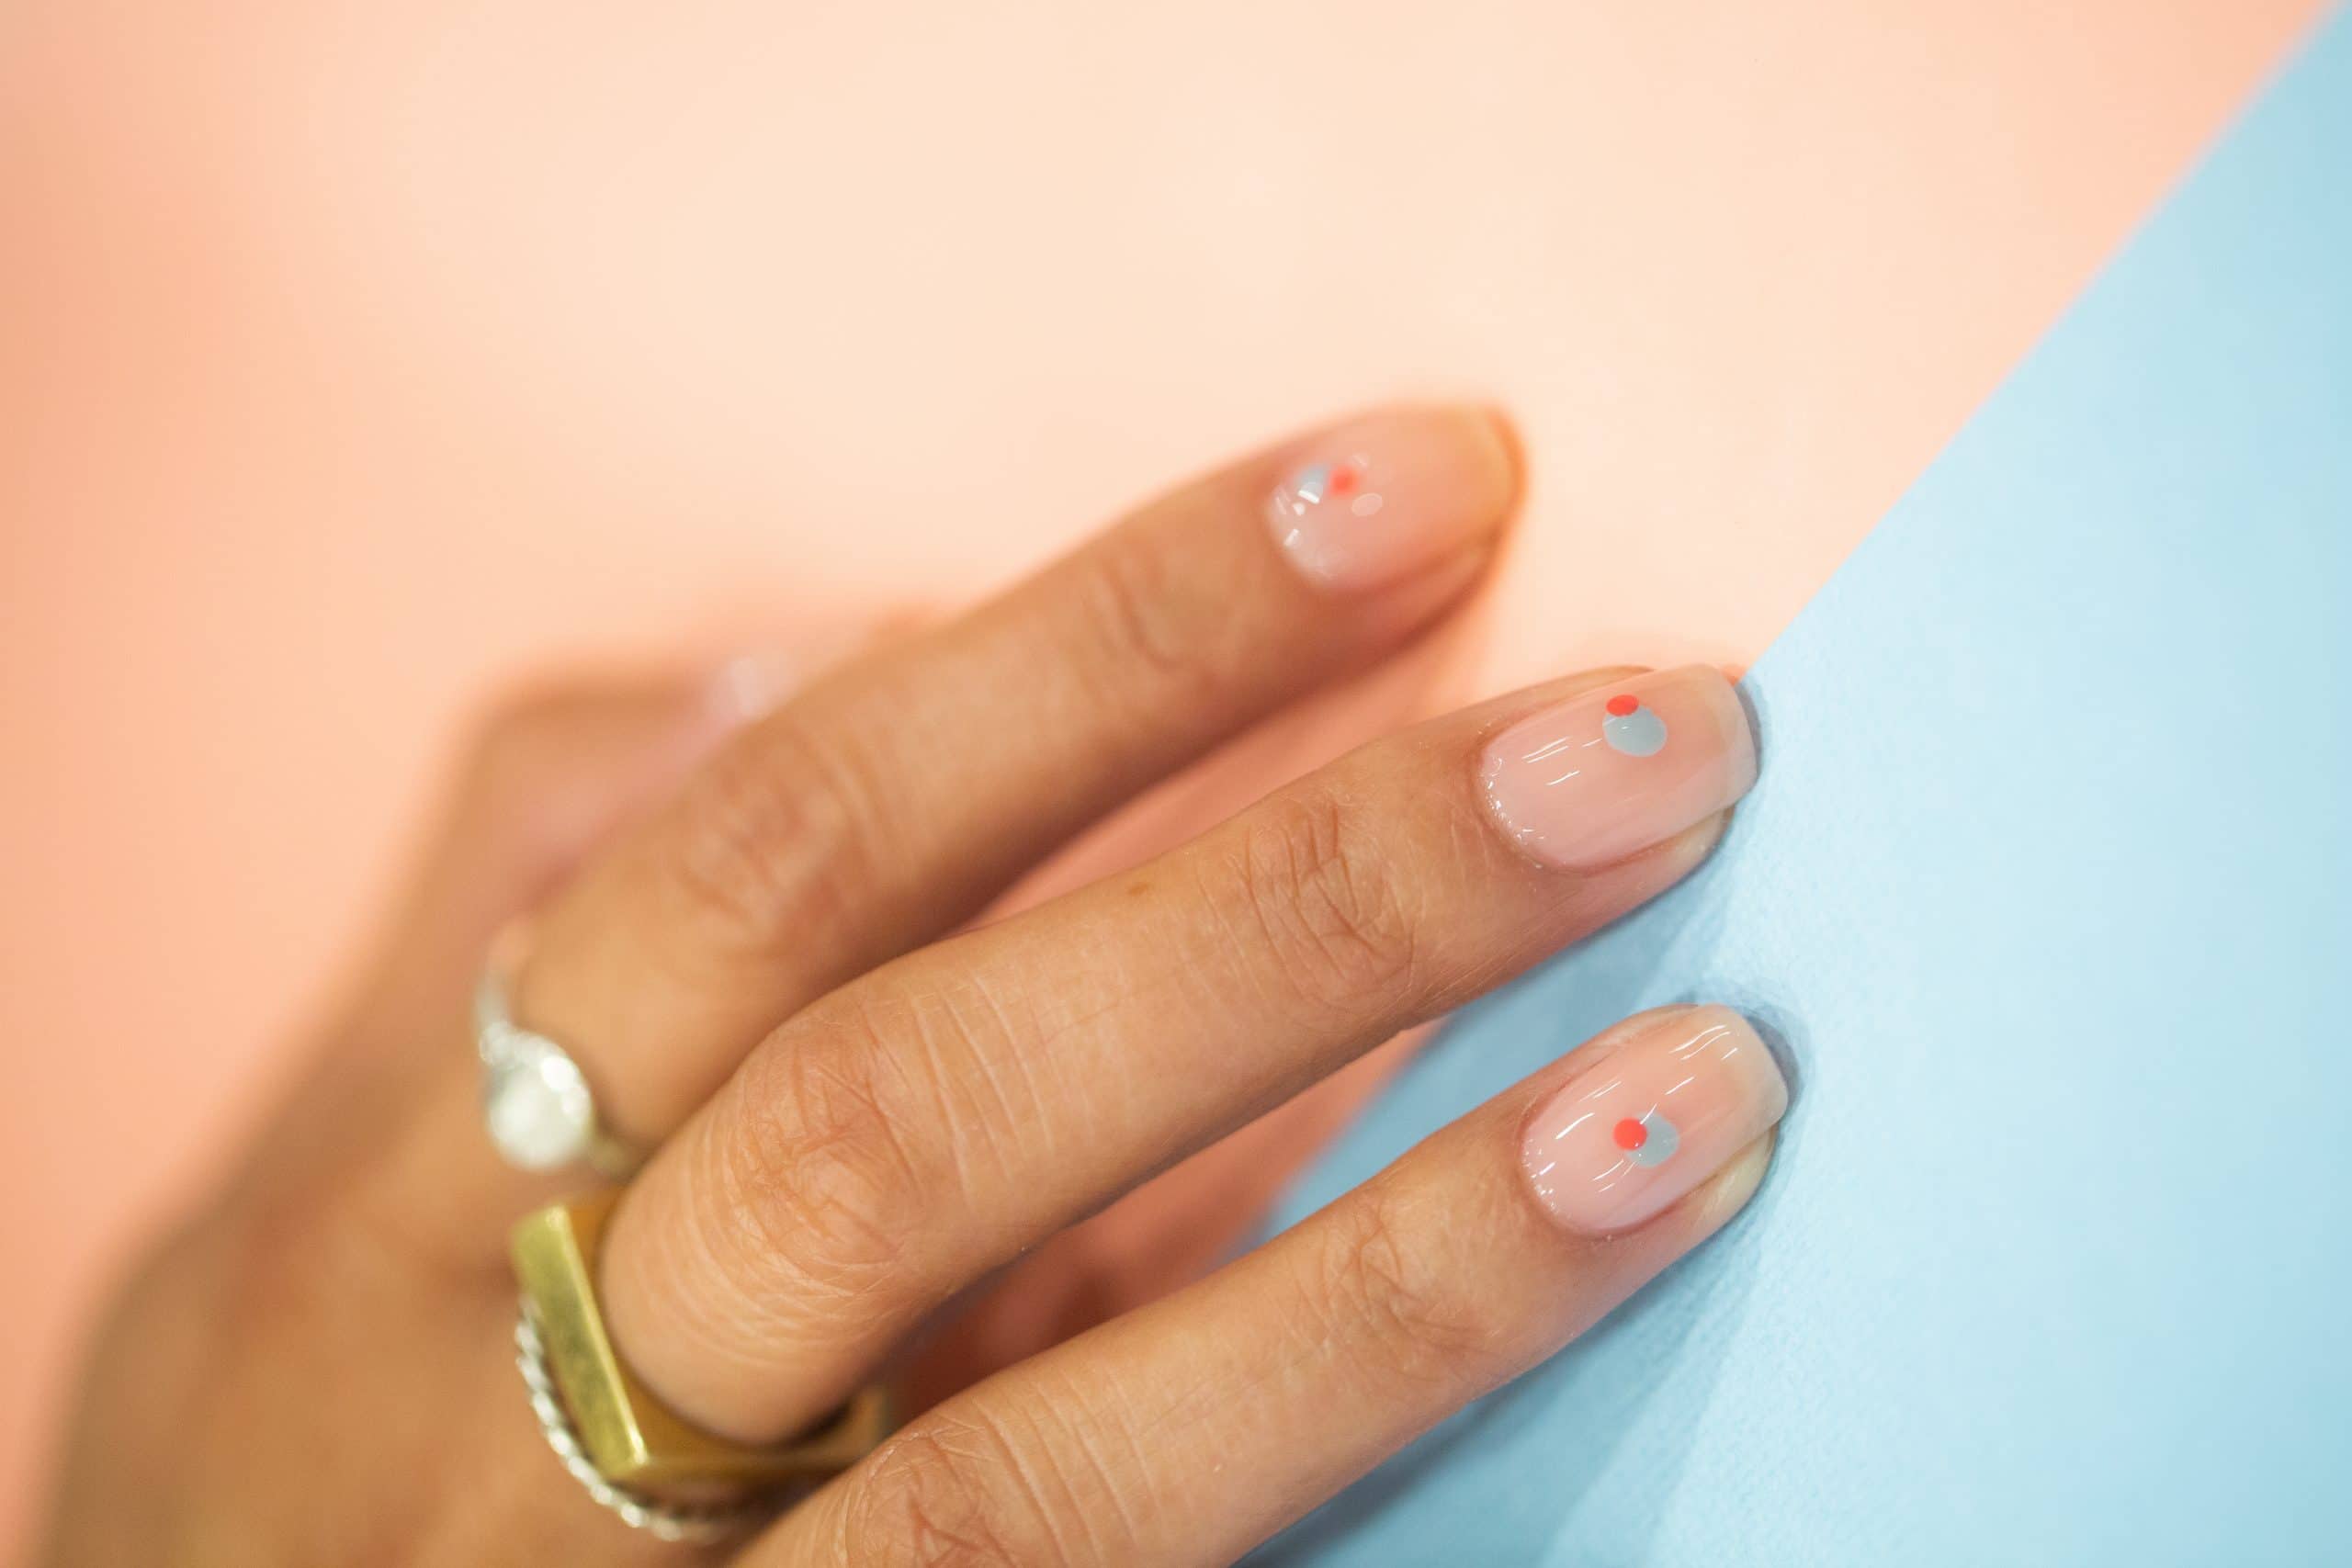 30 Minimalist Manicures That Won't Take Much Time | CafeMom.com